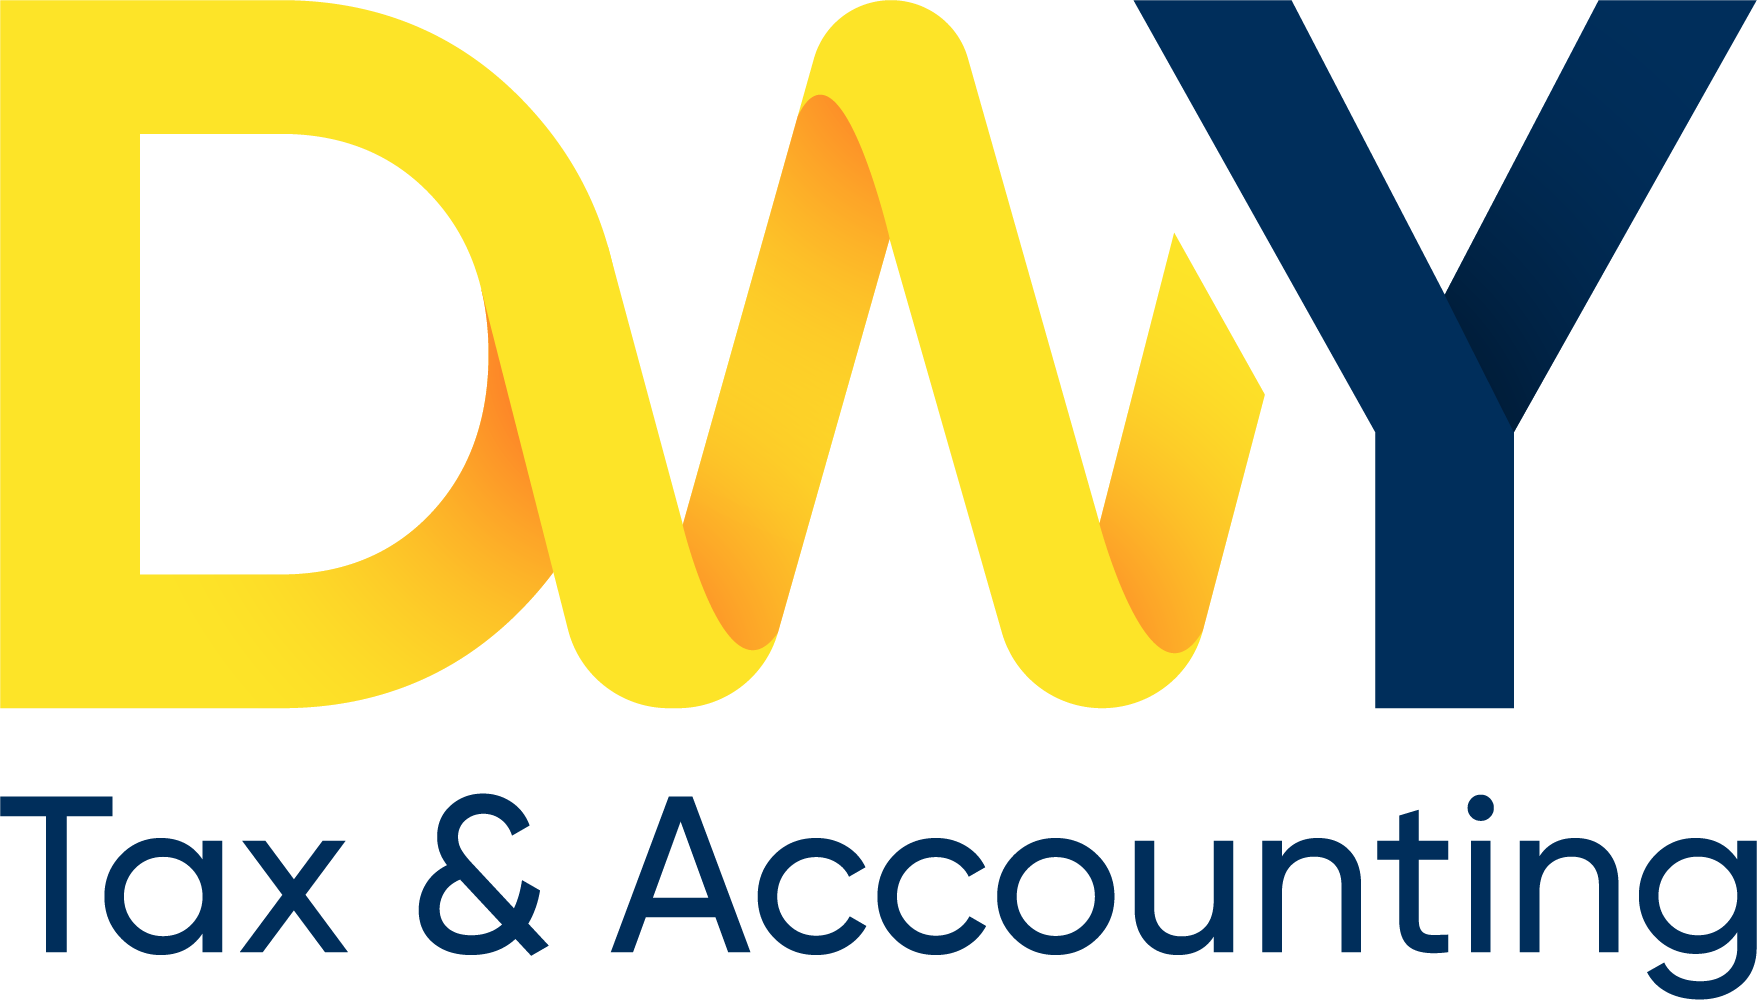 DWY Tax & Accounting Services logo